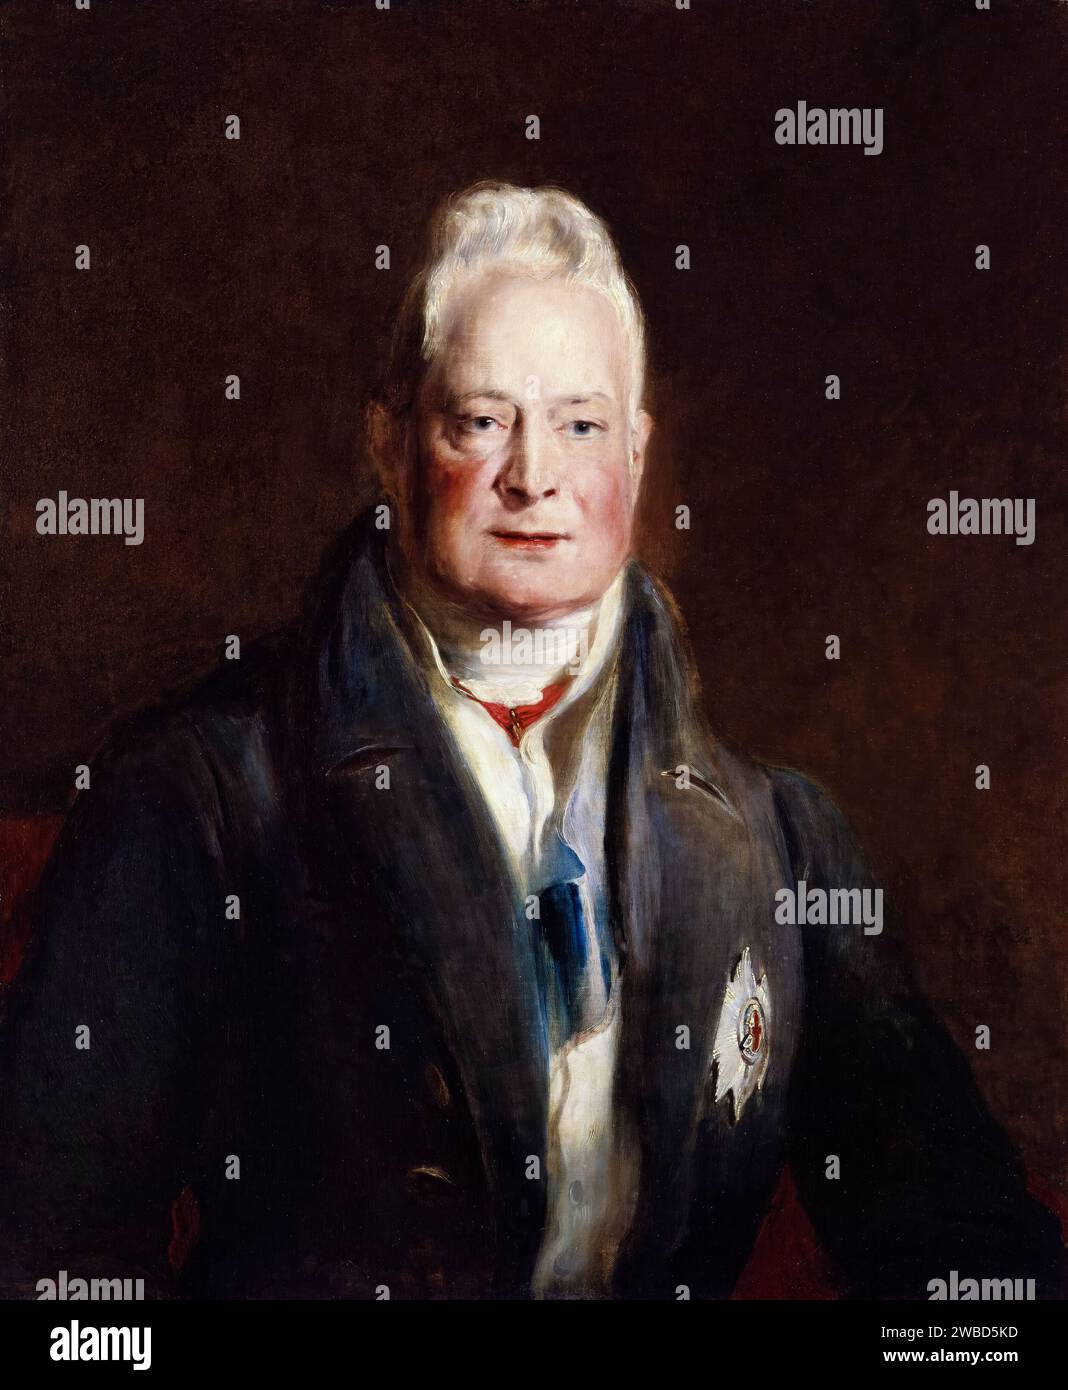 William IV (1765-1837), King of the United Kingdom and Hanover (1830-1837), portrait painting in oil on canvas by Sir David Wilkie, 1837 Stock Photo